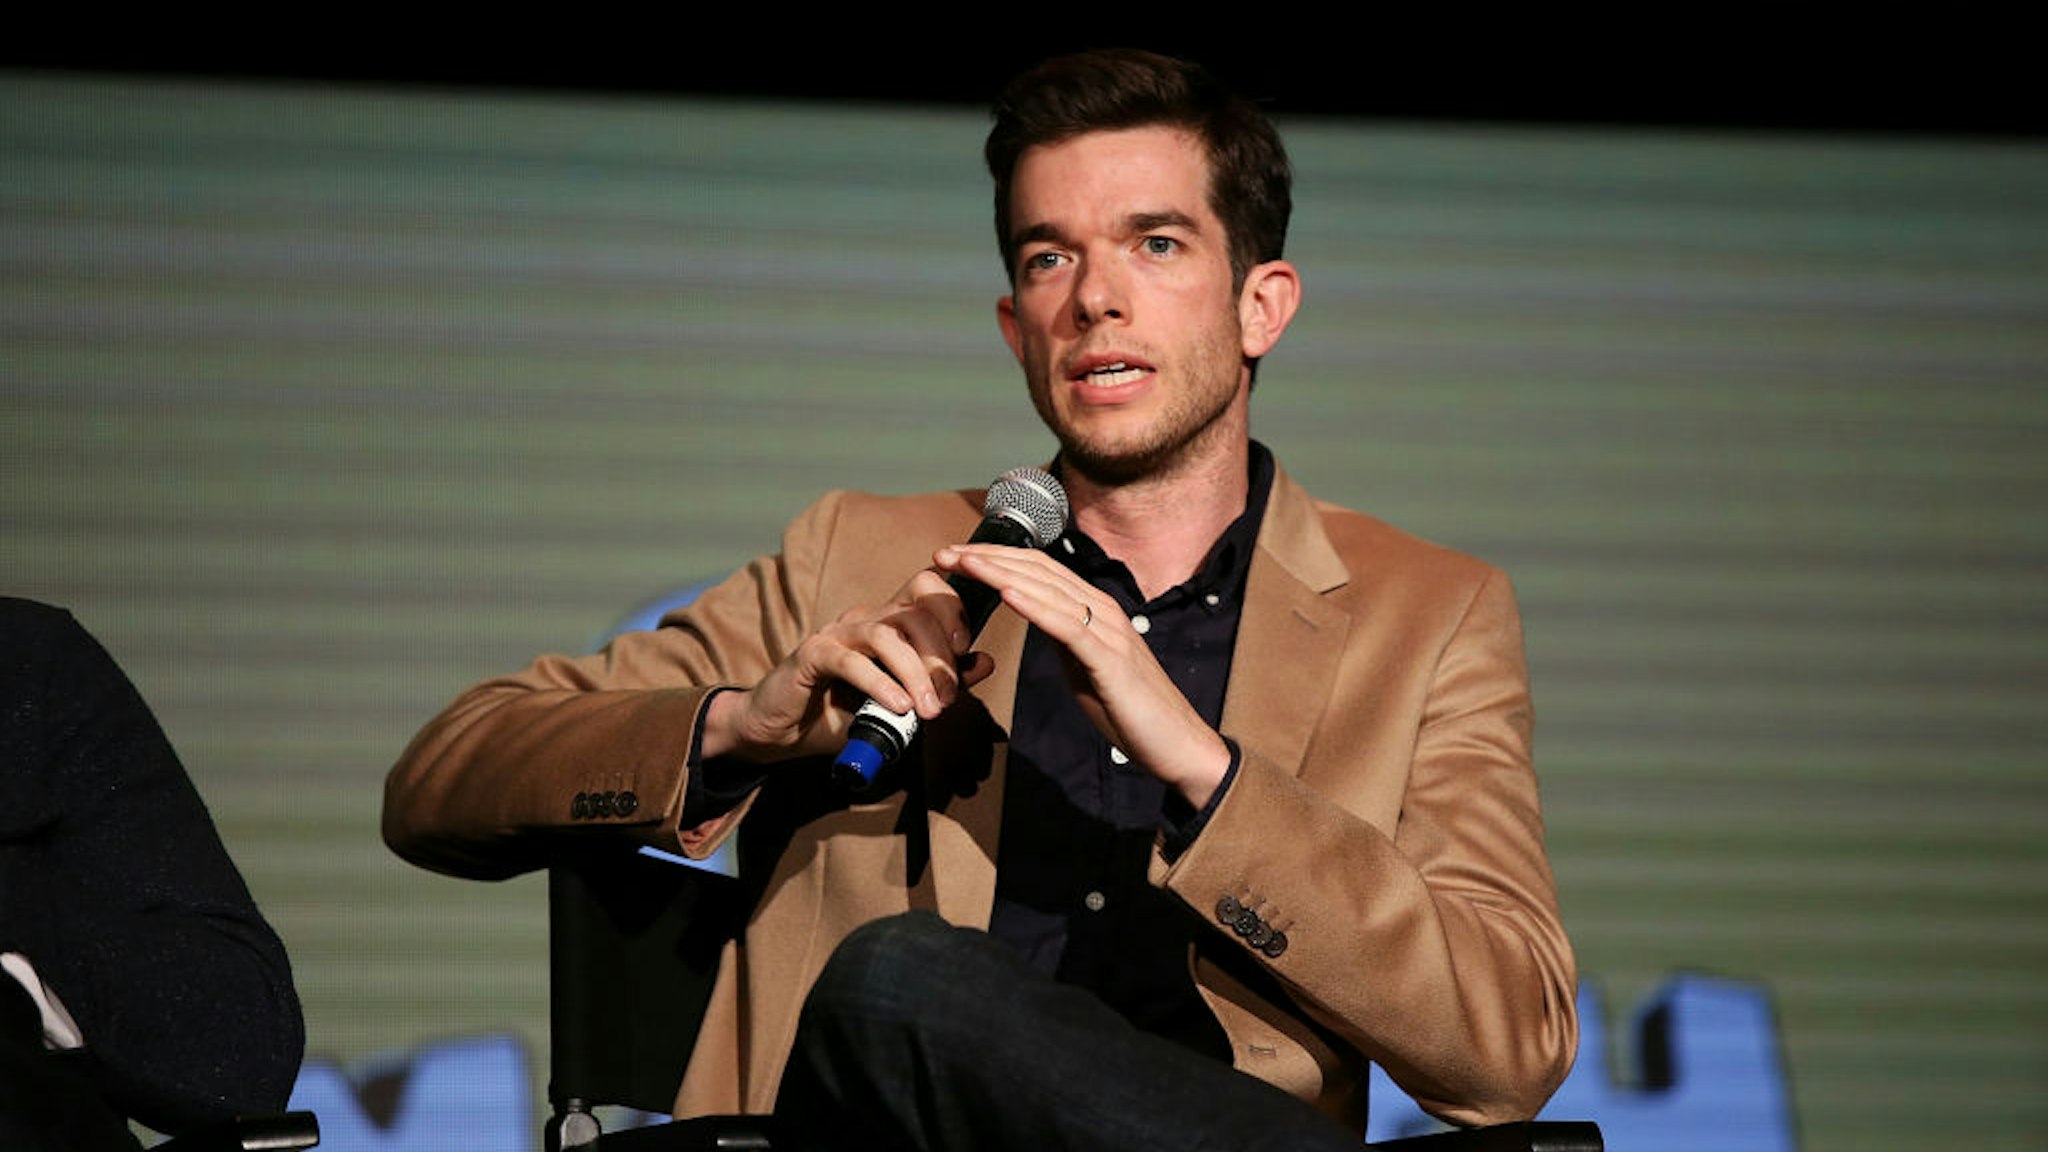 John Mulaney speaks onstage at the #NETFLIXFYSEE Animation Panel Featuring "Big Mouth" and "BoJack Horseman" at Netflix FYSEE at Raleigh Studios on May 21, 2018 in Los Angeles, California.